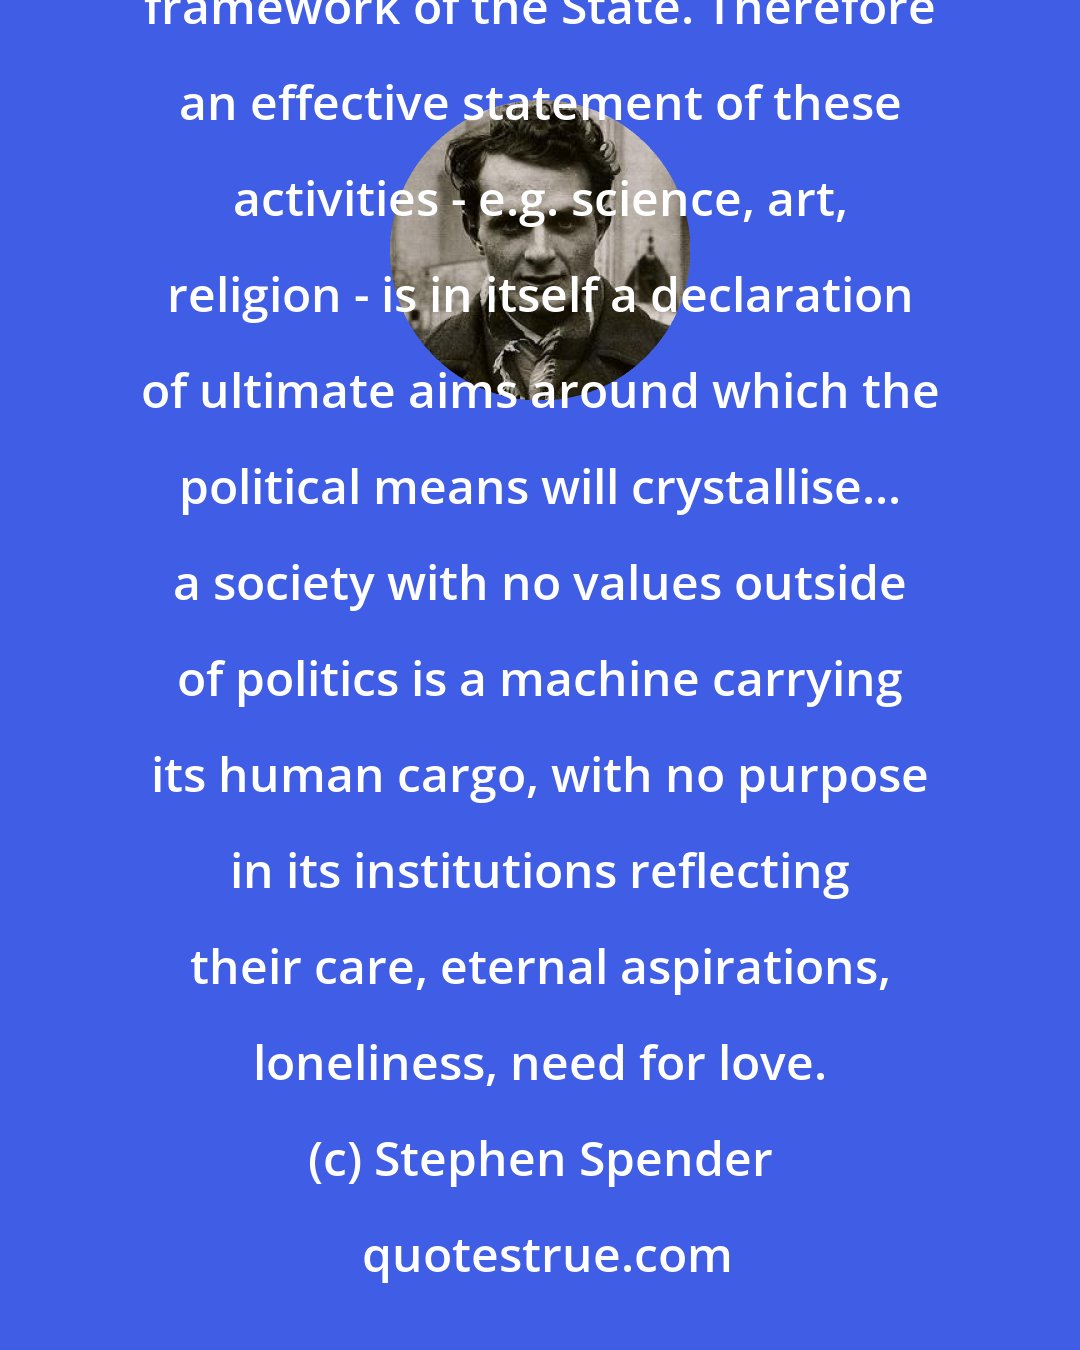 Stephen Spender: The ultimate aim of politics is not politics, but the activities which can be practised within the political framework of the State. Therefore an effective statement of these activities - e.g. science, art, religion - is in itself a declaration of ultimate aims around which the political means will crystallise... a society with no values outside of politics is a machine carrying its human cargo, with no purpose in its institutions reflecting their care, eternal aspirations, loneliness, need for love.